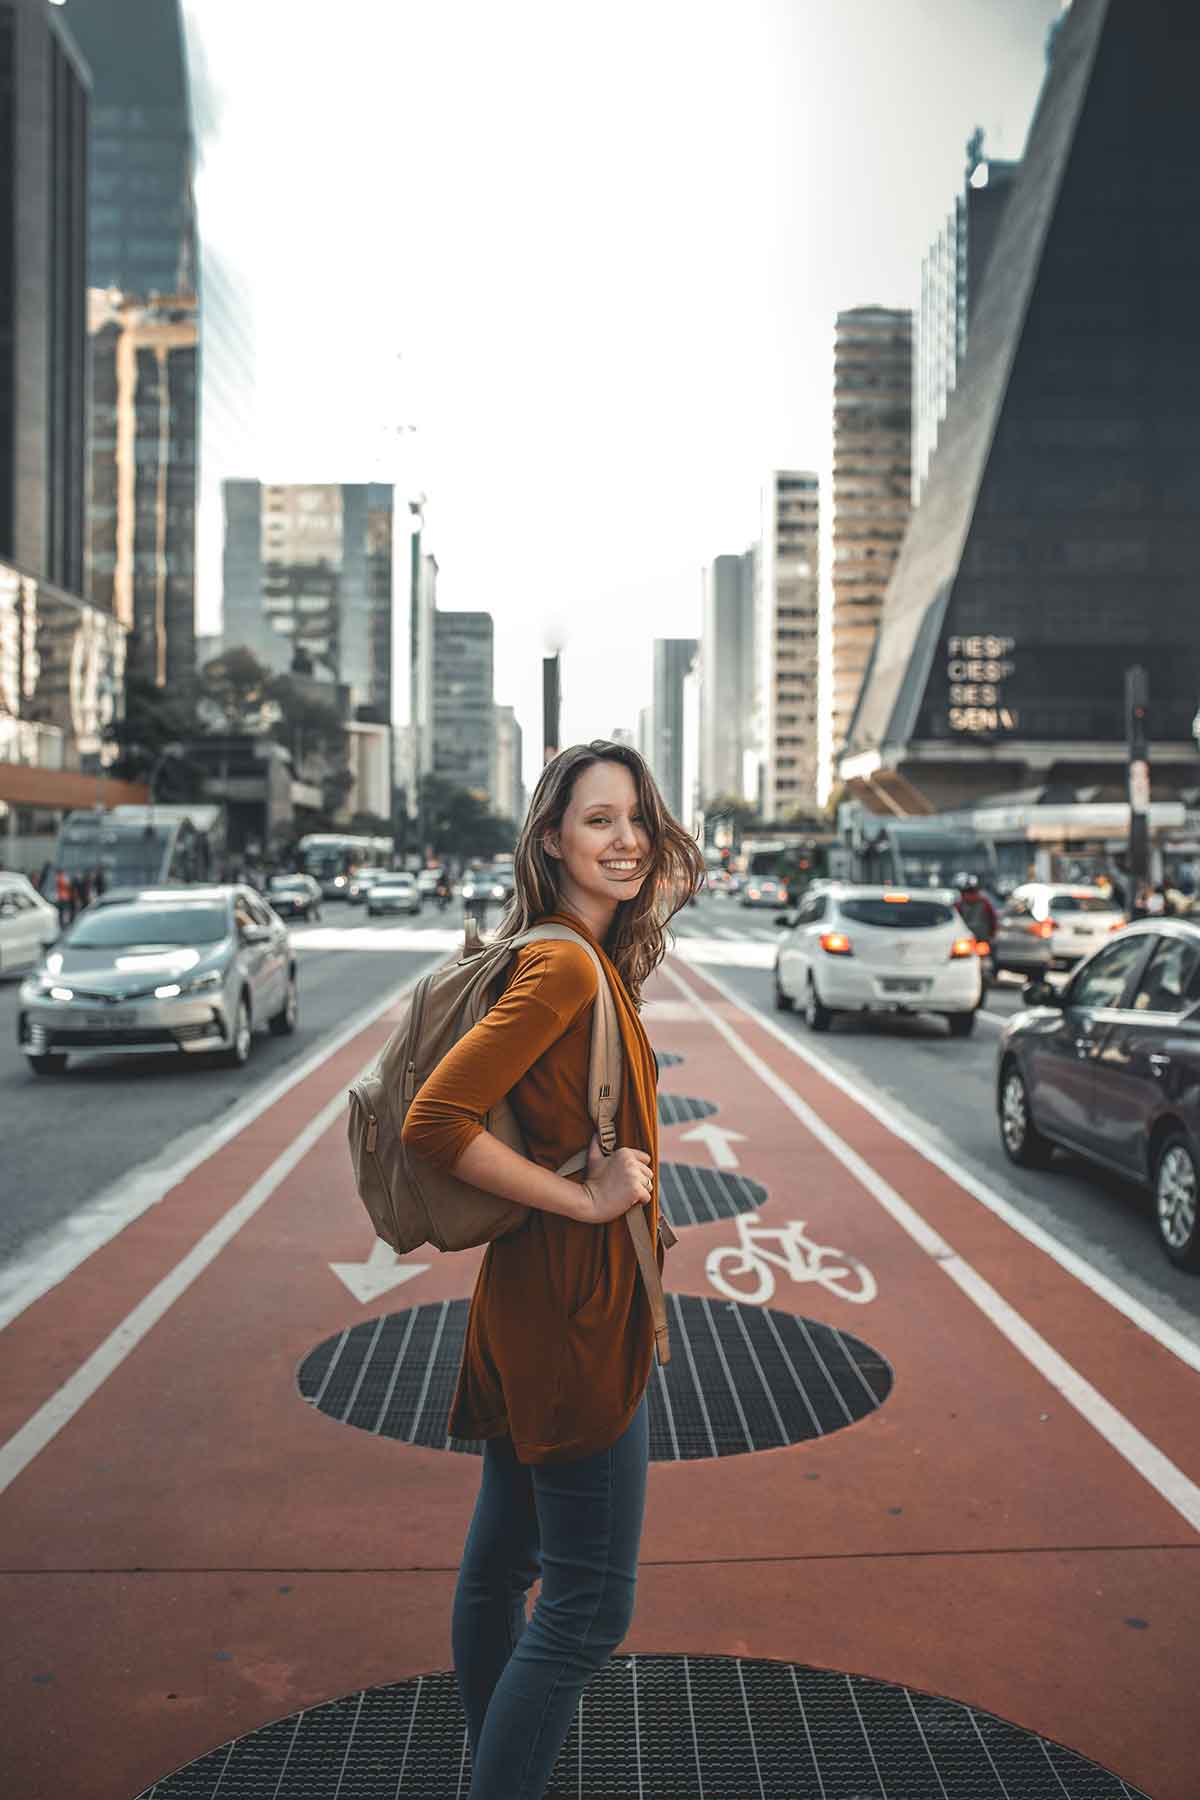 A woman with a backpack crossing a road in a big city.